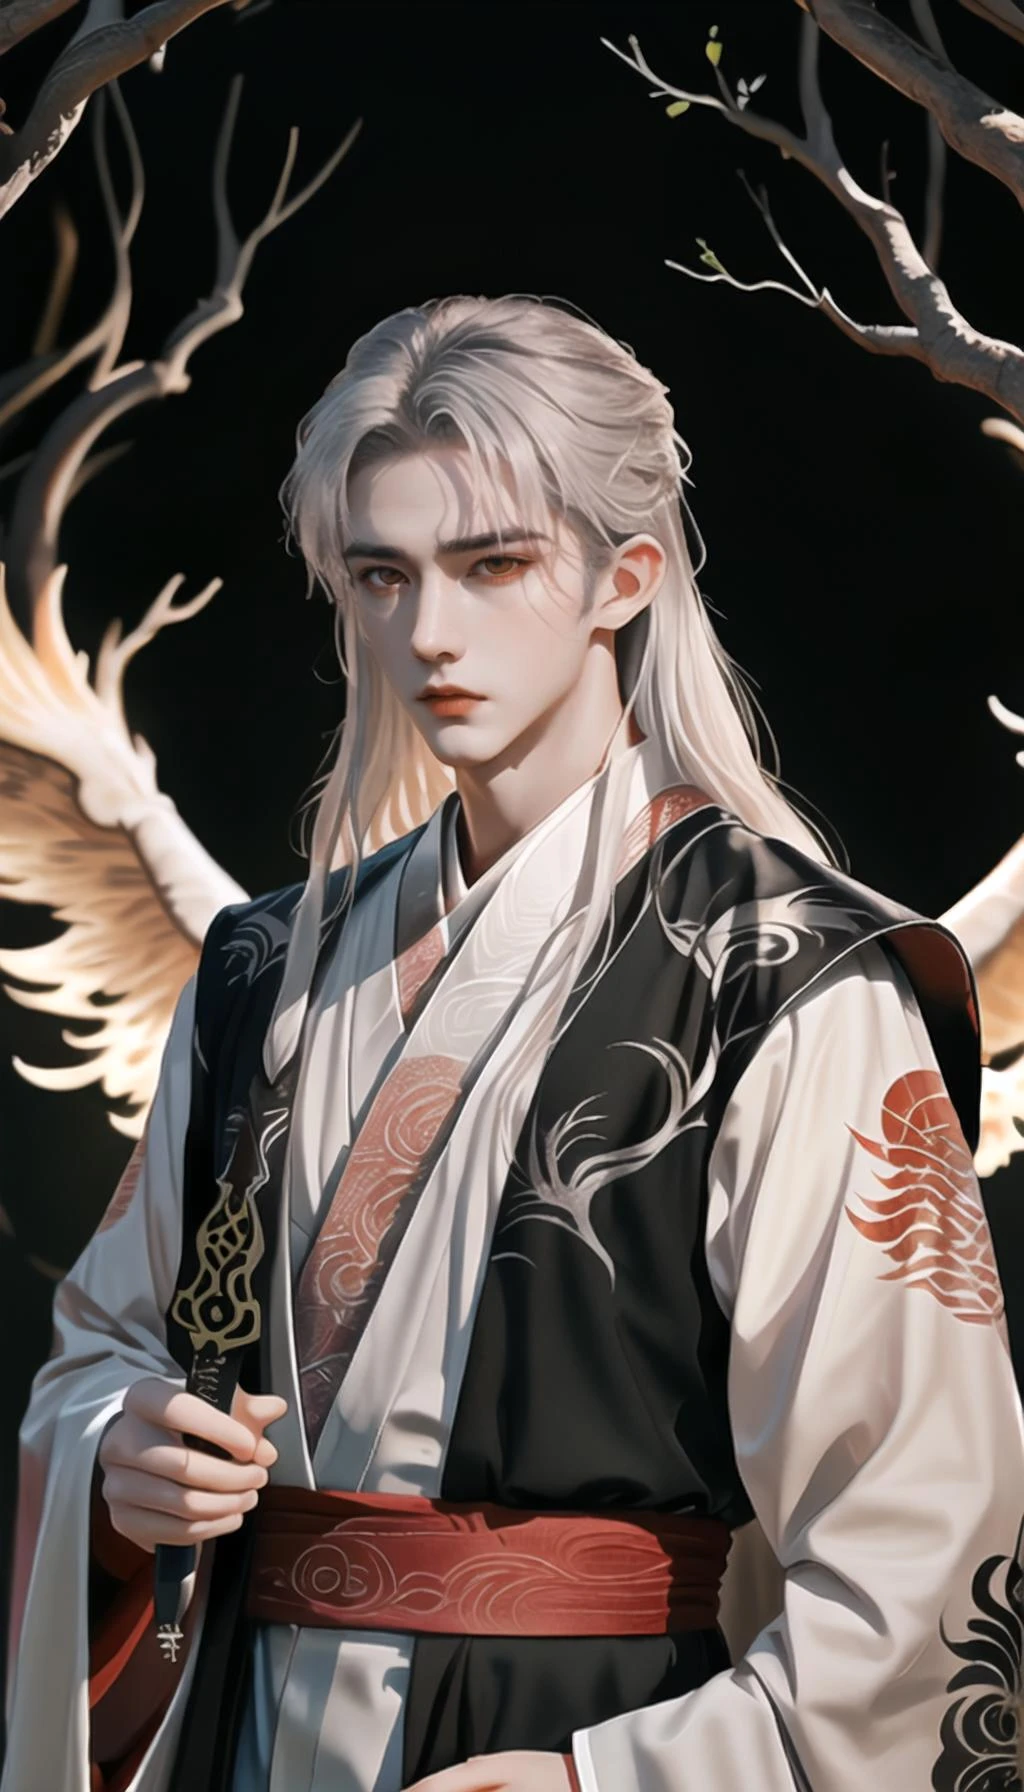 highres,a young and handsome boy,white hair,hanfu with black gold patterns,holding a dagger in hand,eyes glazed,expressionless,slender red phoenix eyes,a terrifying and tense atmosphere,mirkwood,hand details: five fingers,black wings,black feather,detailed lighting,